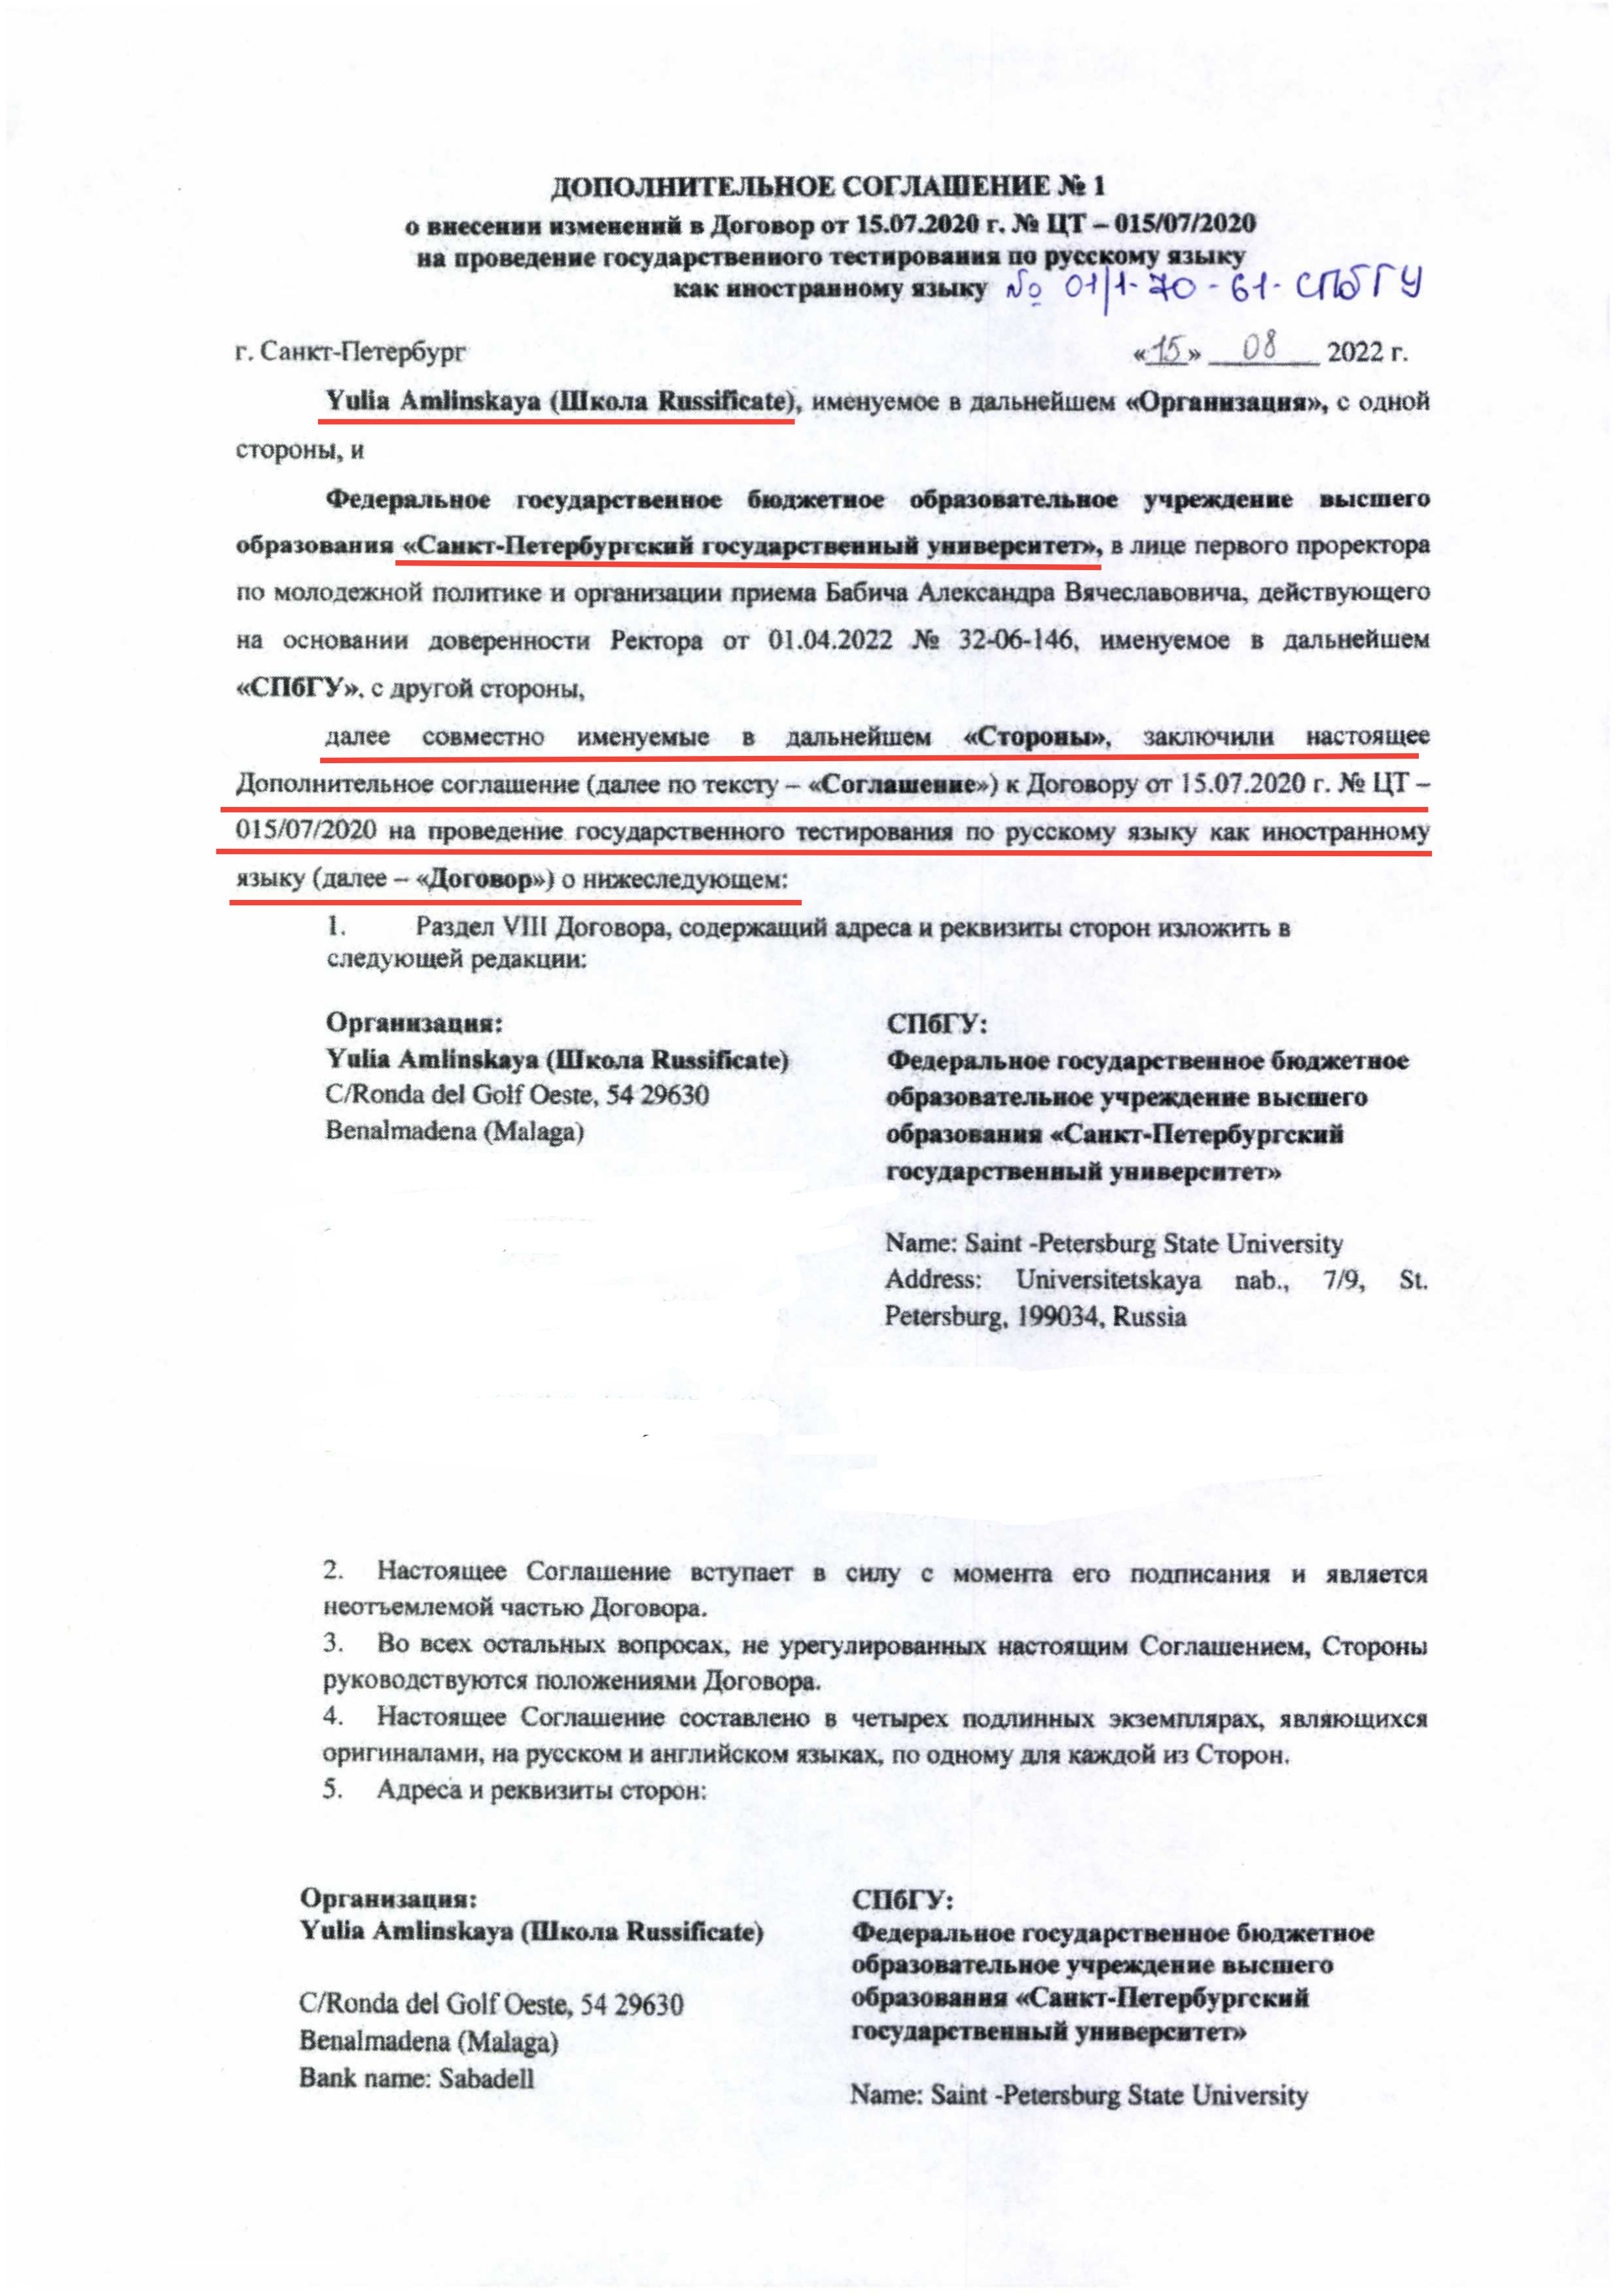 Official contract with Saint-Petersburg State University Full Page 1